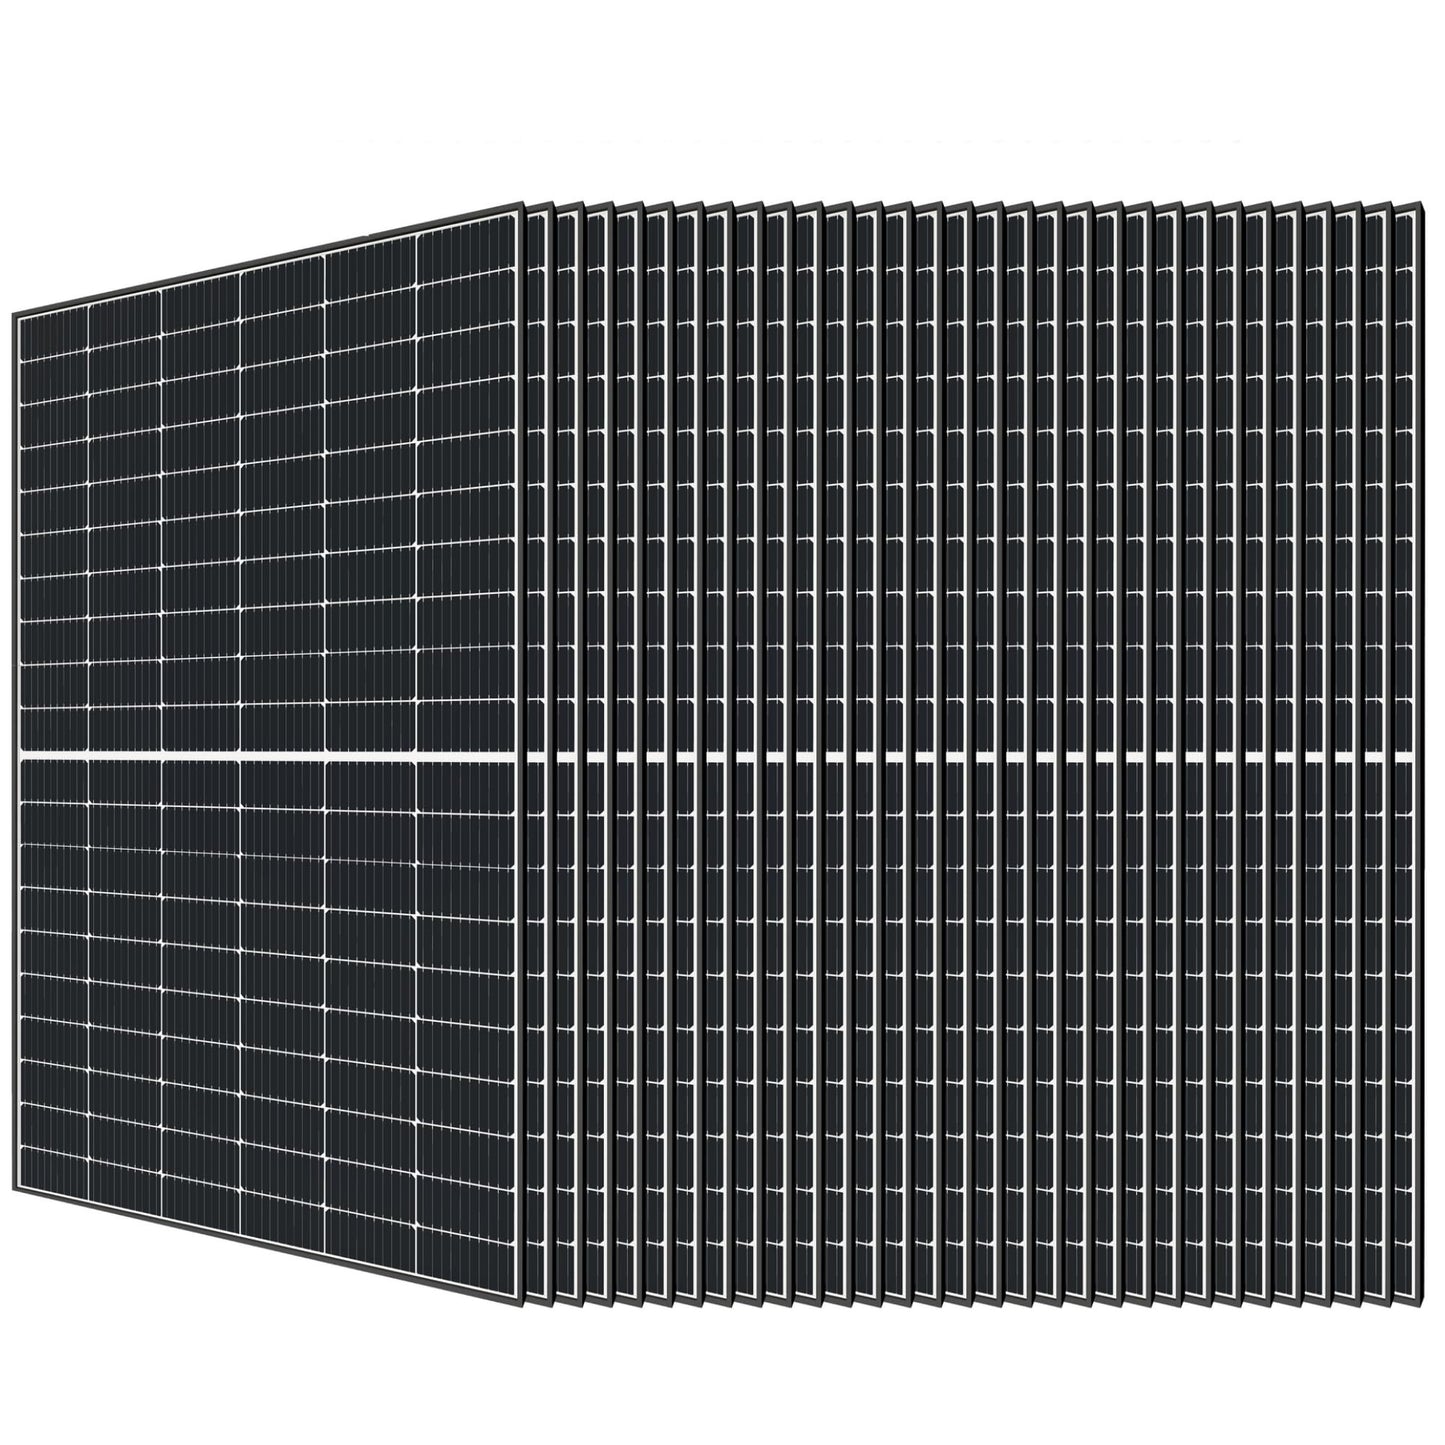 JJN 9BB Bifacial Solar Panel 12V/24V 31PCS 365W Monocrystalline Kit, High-Efficiency Mono Cells Off-Grid Charge System for House Rooftop Residential Commercial Home Marine Boat Shed Farm